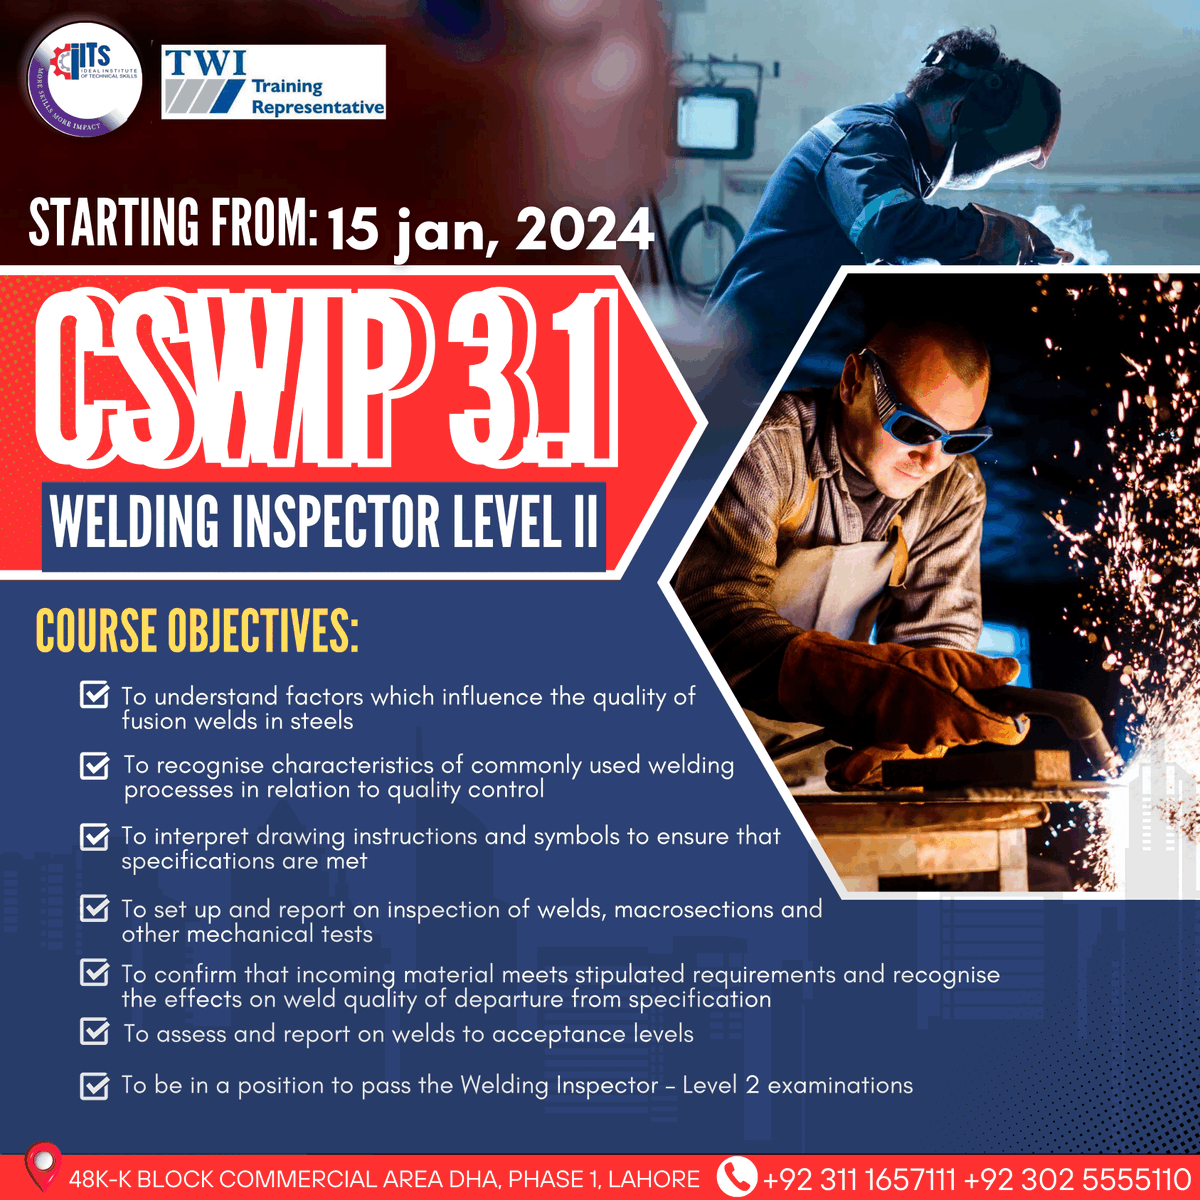 January 15th, 2024, as we unveil the CSWIP 3.1 Welding Inspector Level 2 Course at the esteemed Ideal Institute of Technical Skills – your beacon to success as a TWI Training Representative!

#CSWIP3.1 #WeldingInspector #ForgeExcellence #IdealInstitute #TWITraining